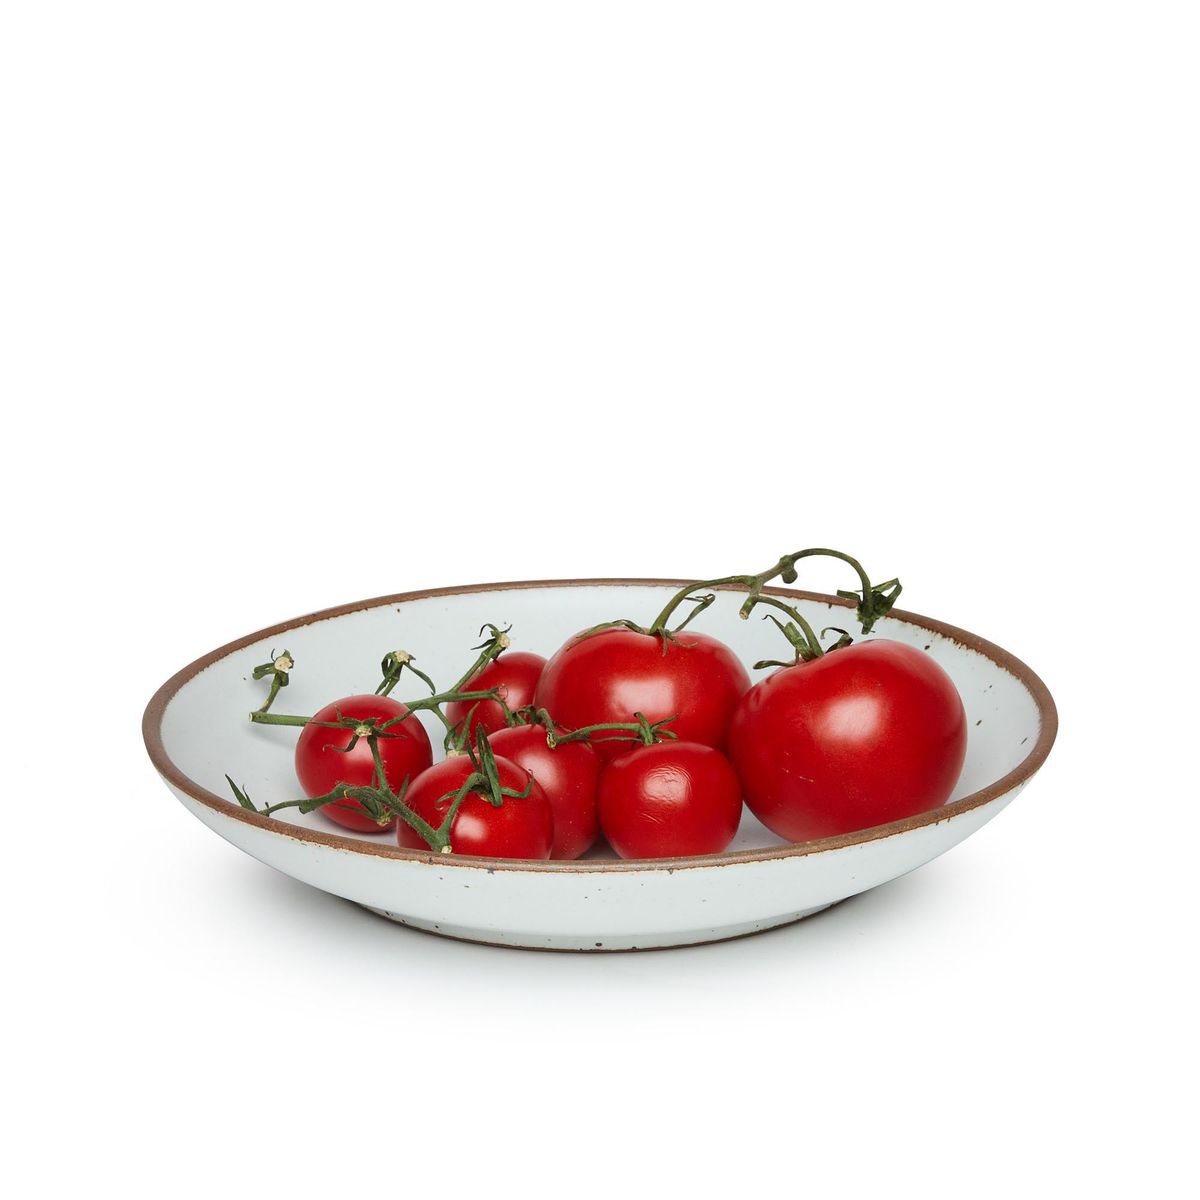 A large ceramic plate with a curved bowl edge in a cool white color featuring iron speckles and an unglazed rim, filled with tomatoes